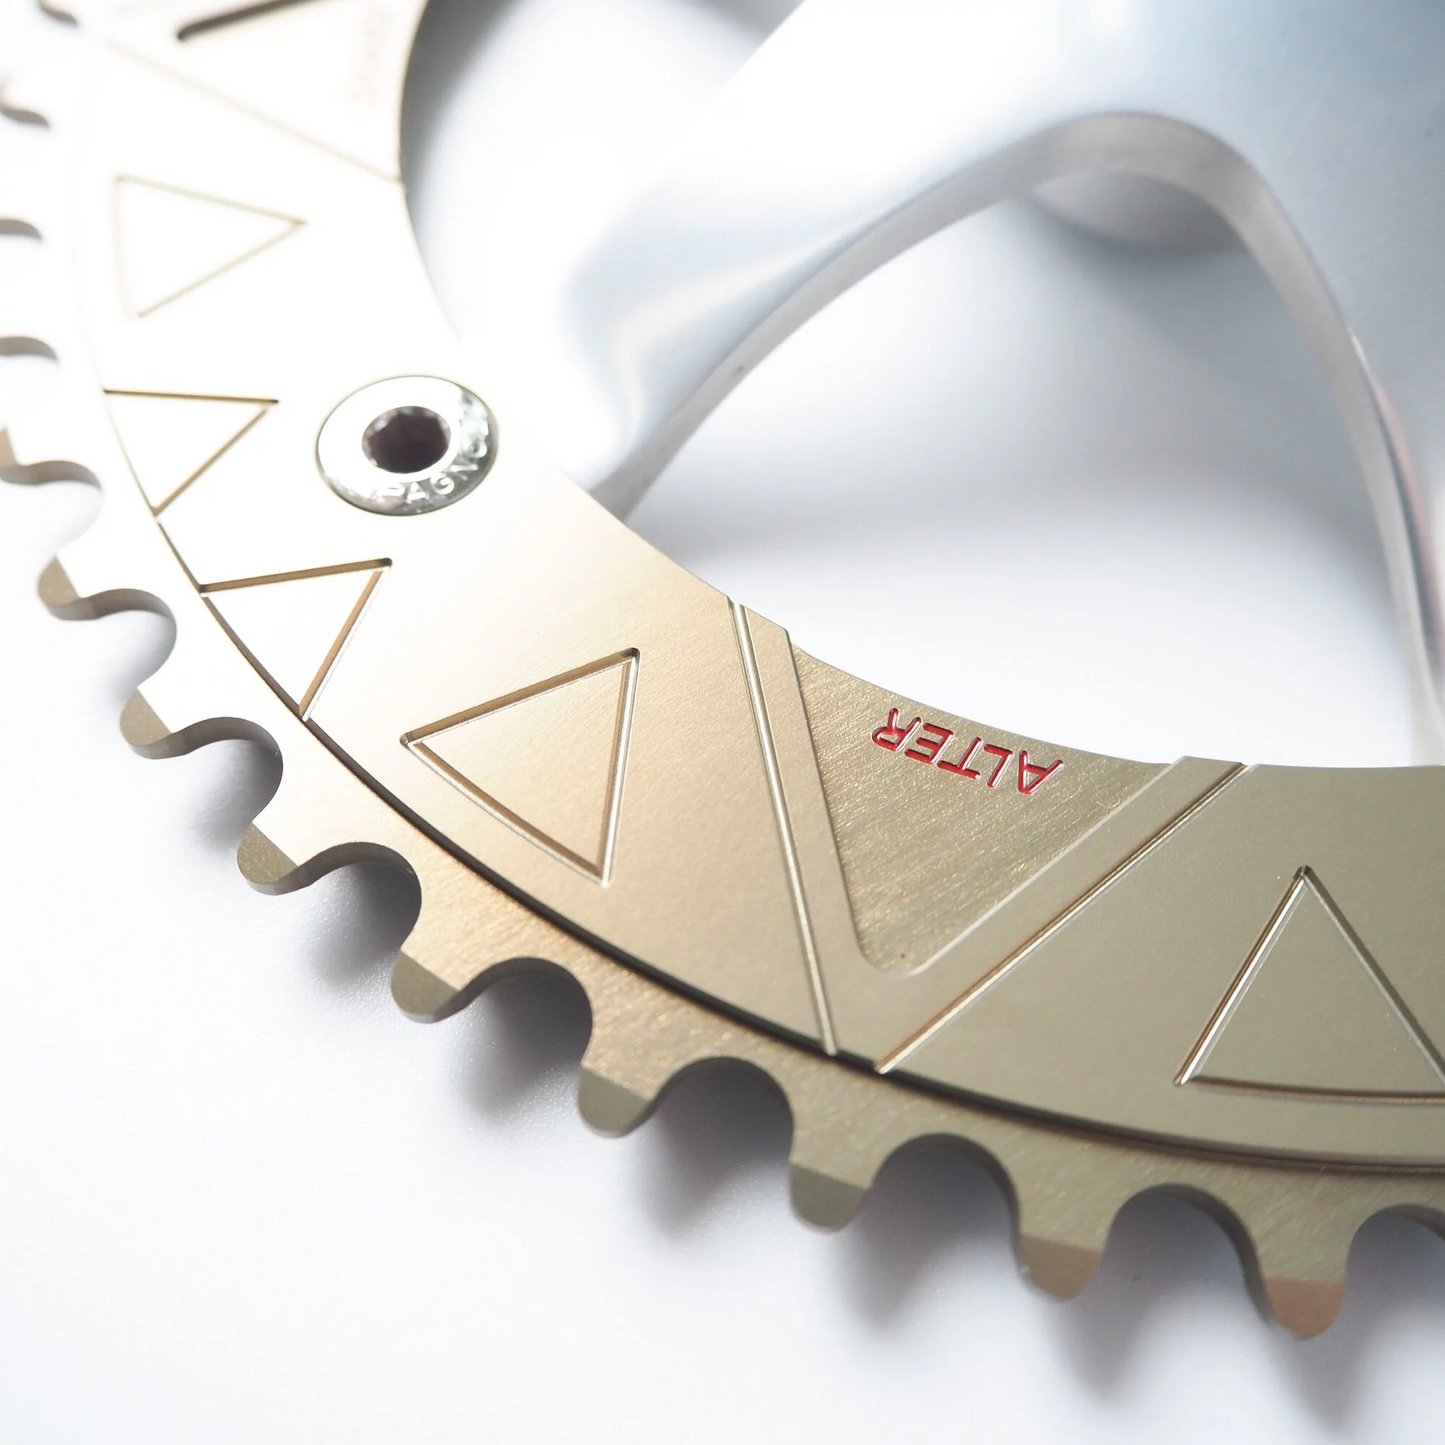 Alter Cycles Shark Chainring SK47HA - Copper 47T